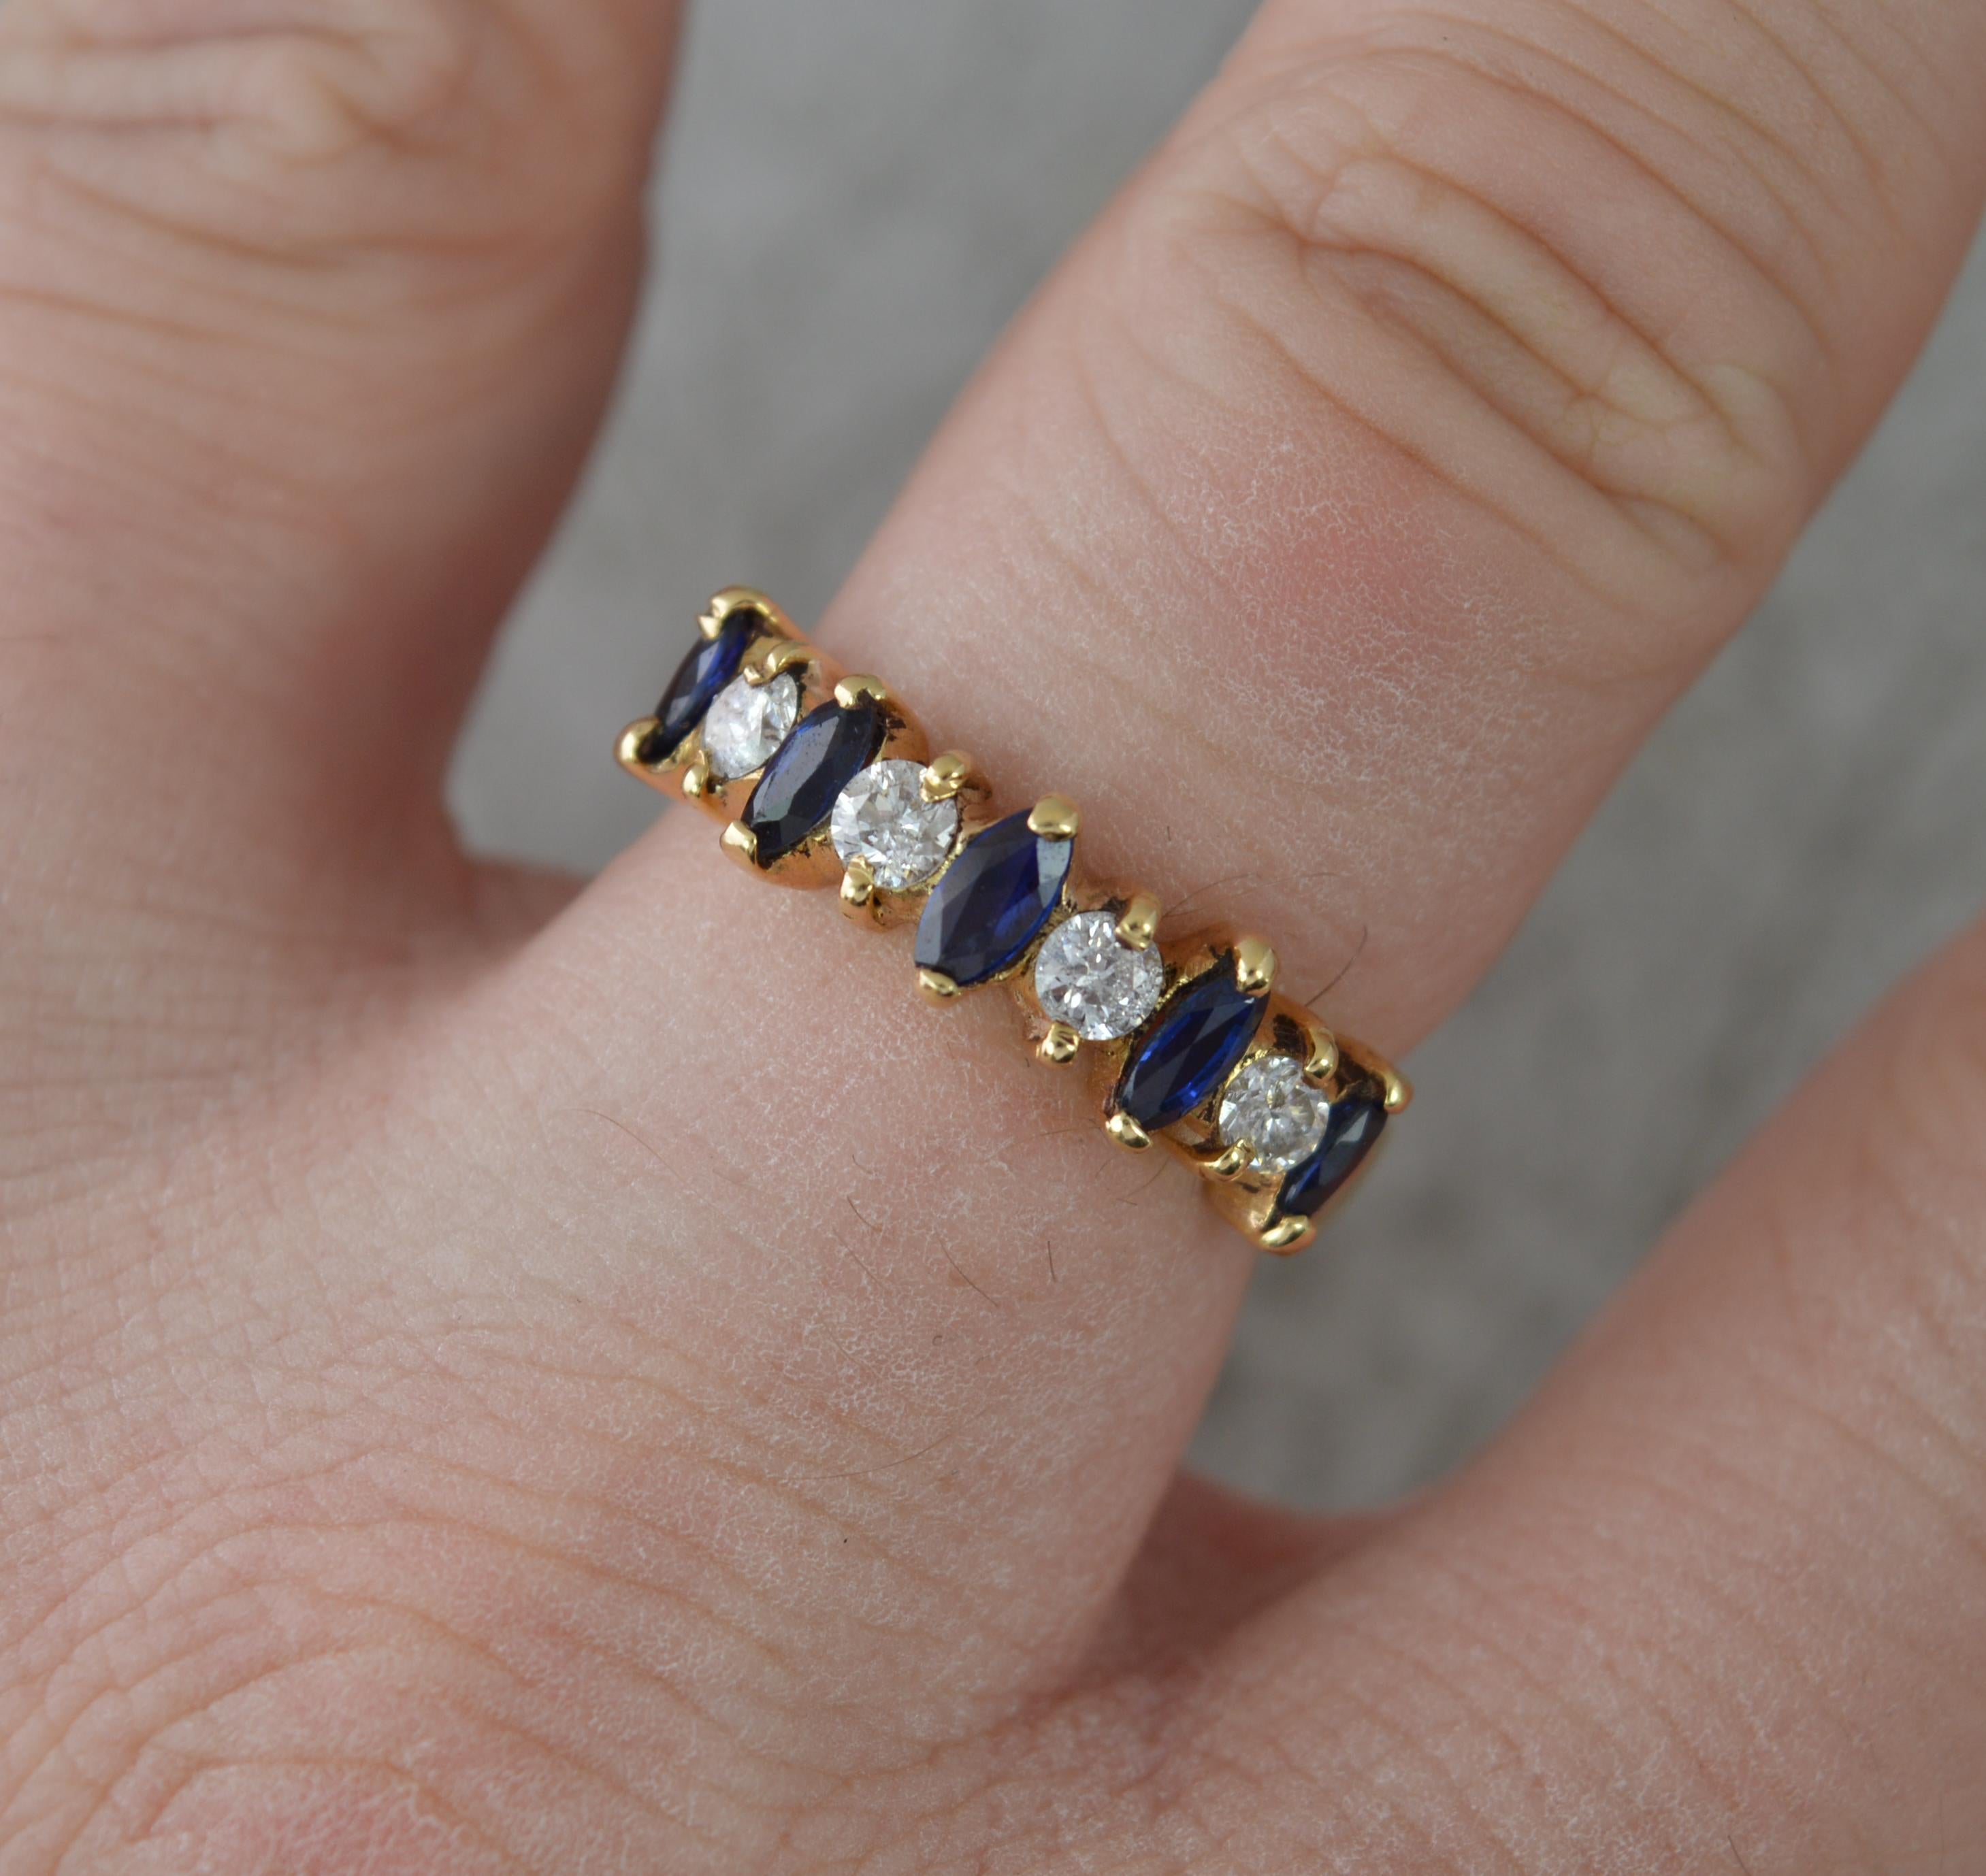 A very fine sapphire and diamond stack ring.
Solid 18 carat yellow gold example.
Set with alternating marquise cut blue sapphires and round brilliant cut white diamonds. 0.4cts of diamond.
20mm spread of stones. Protruding 3.5mm off the